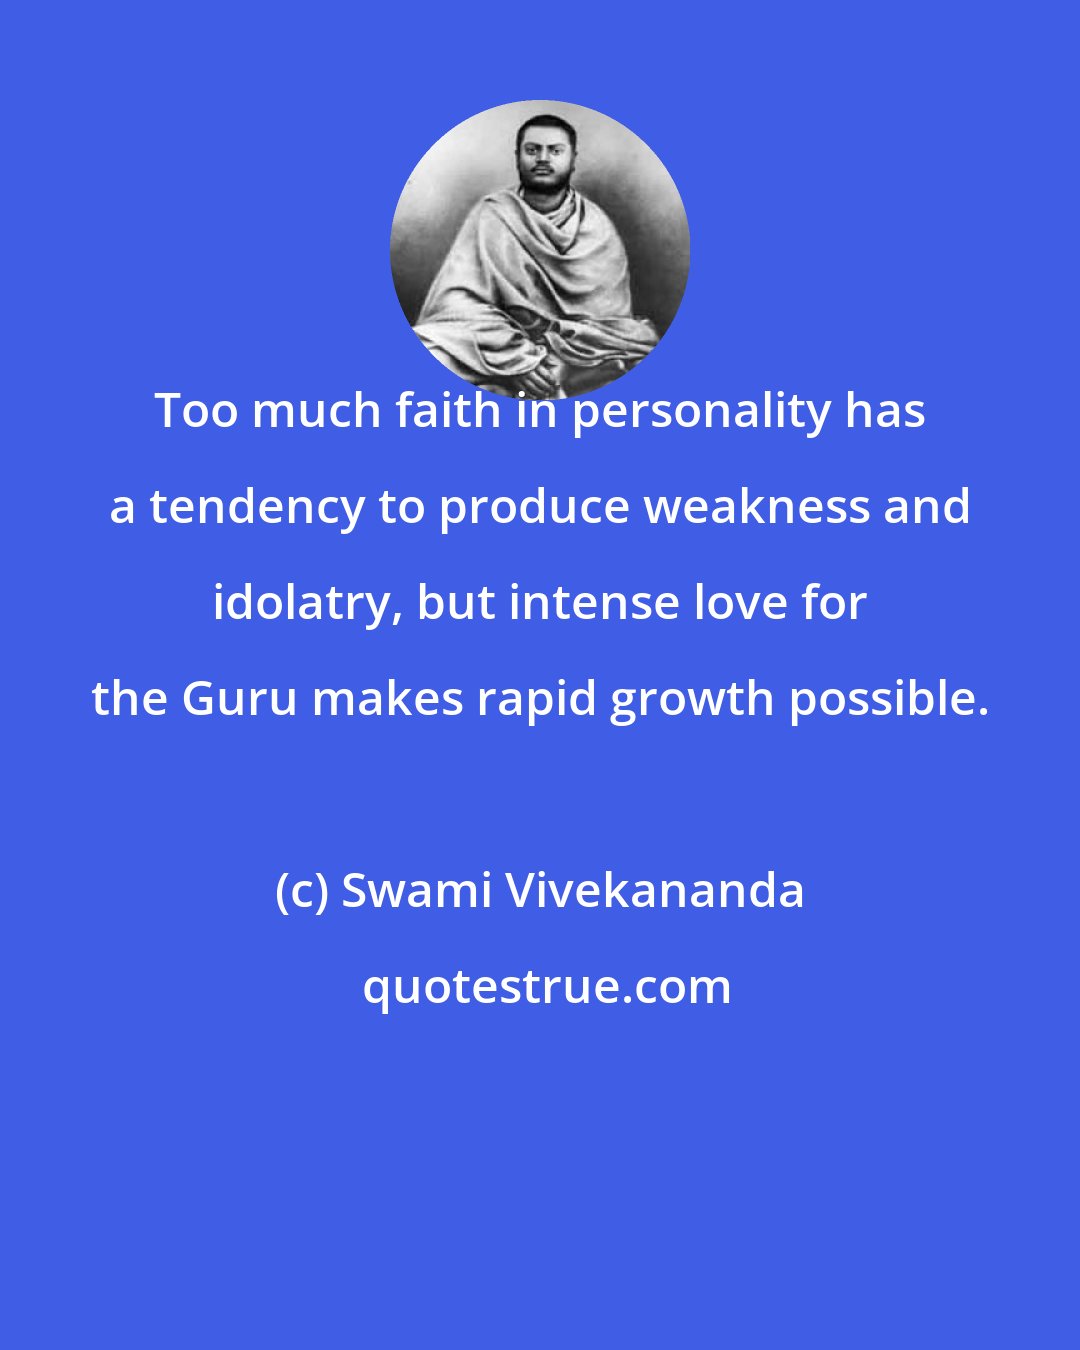 Swami Vivekananda: Too much faith in personality has a tendency to produce weakness and idolatry, but intense love for the Guru makes rapid growth possible.